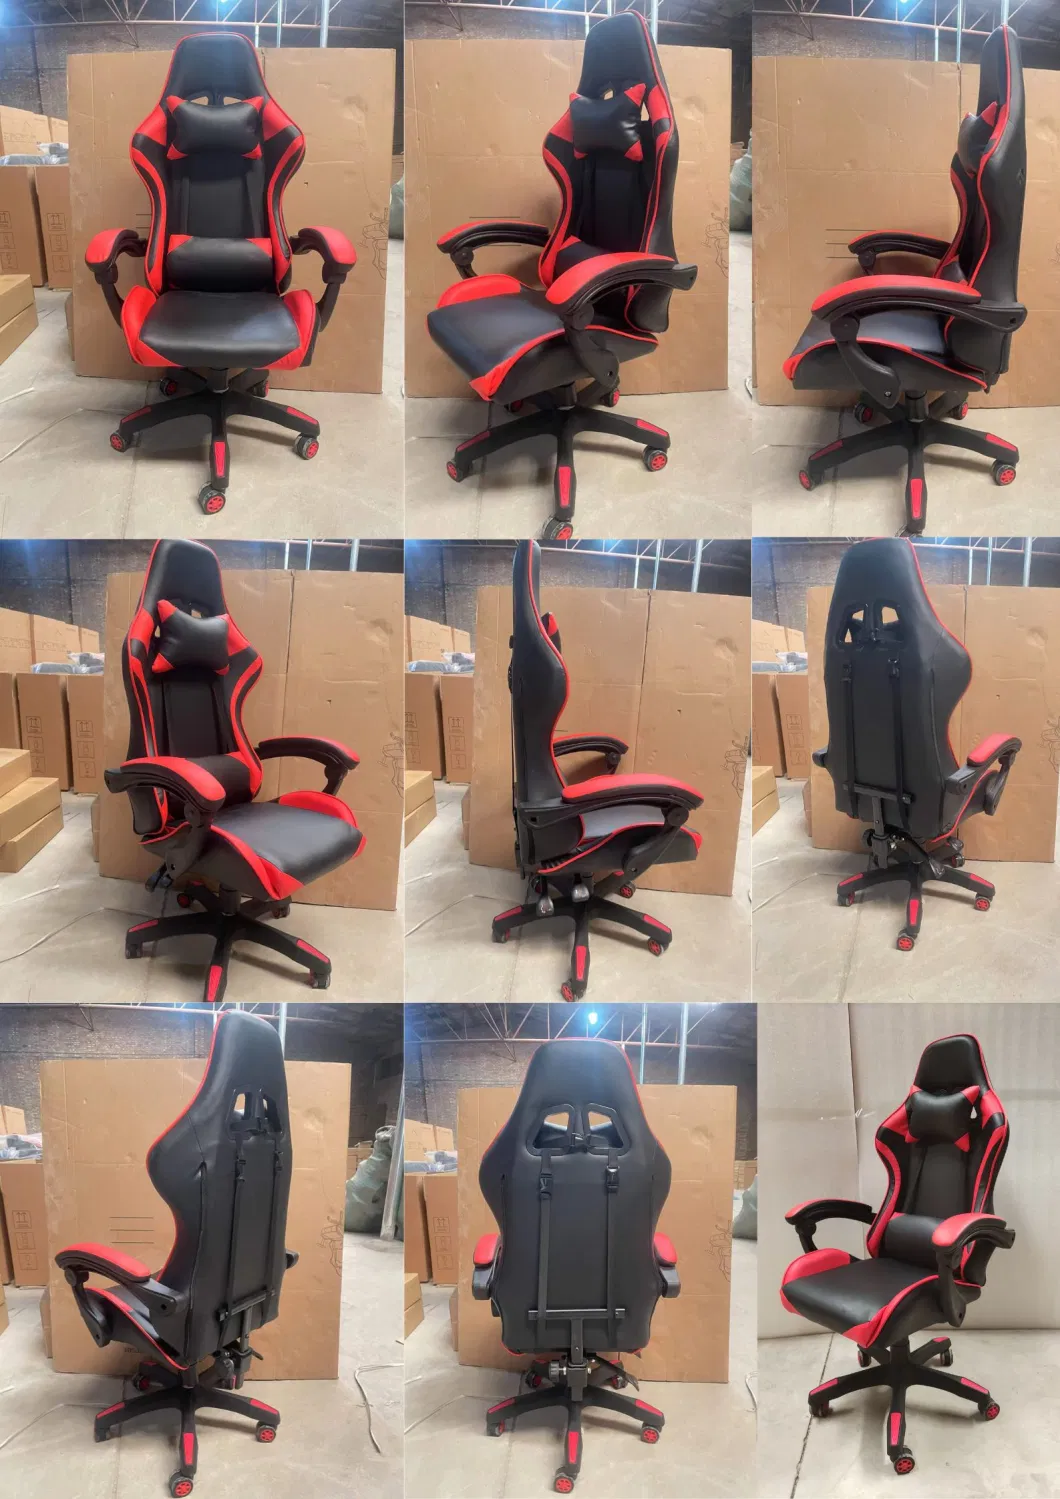 Computer Cheap Price 1 Piece Free Shipping Gaming Chair Black and Red Ergonomic High Back Gamer Chair